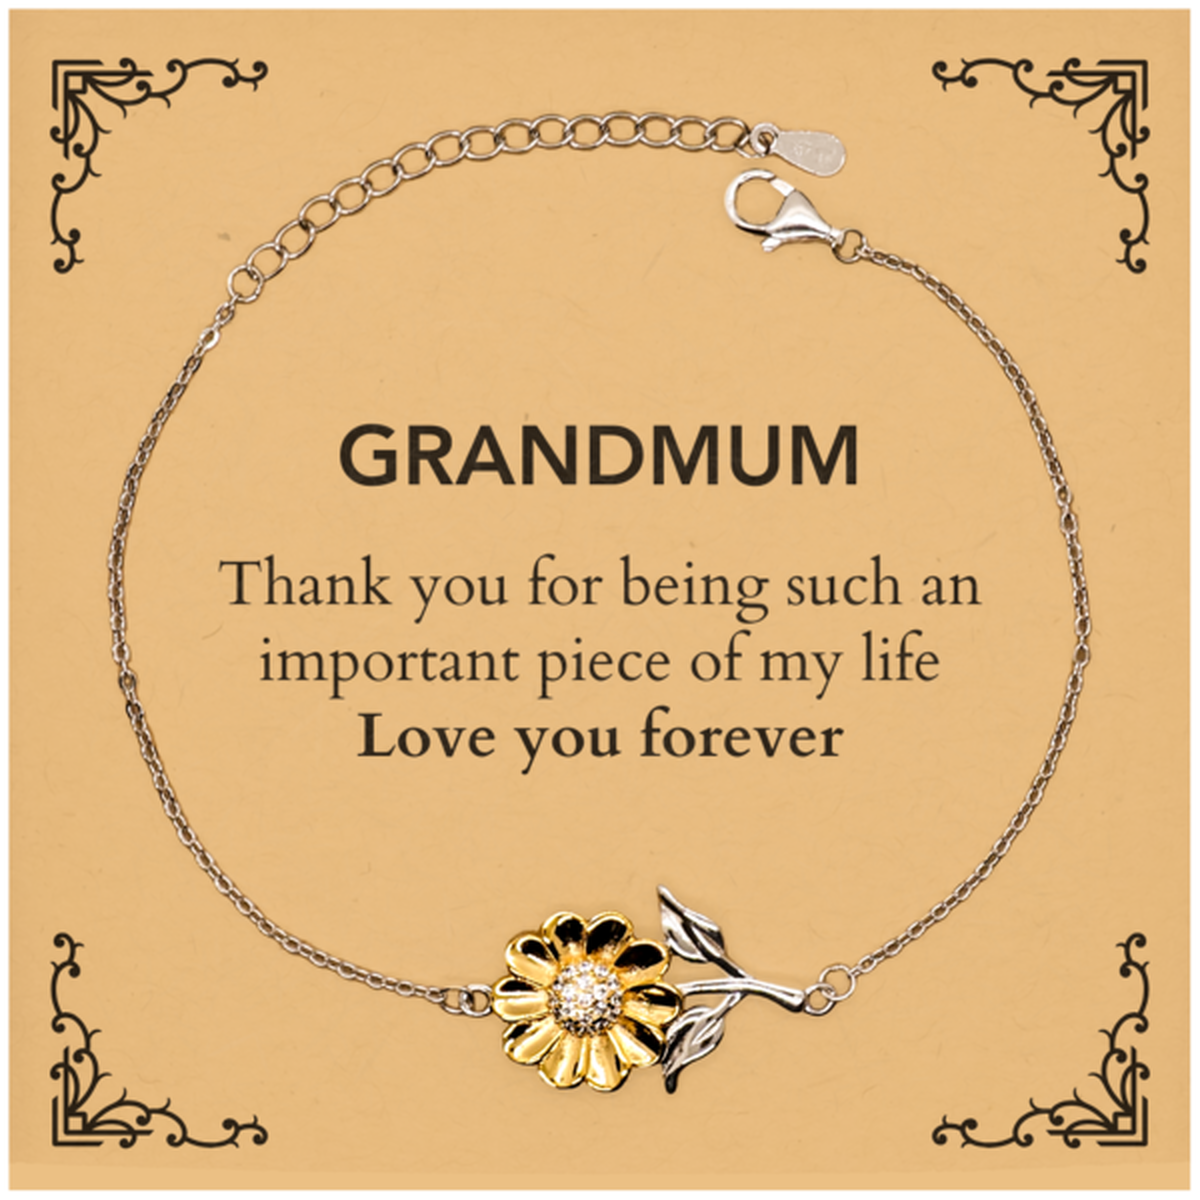 Appropriate Grandmum Sunflower Bracelet Epic Birthday Gifts for Grandmum Thank you for being such an important piece of my life Grandmum Christmas Mothers Fathers Day